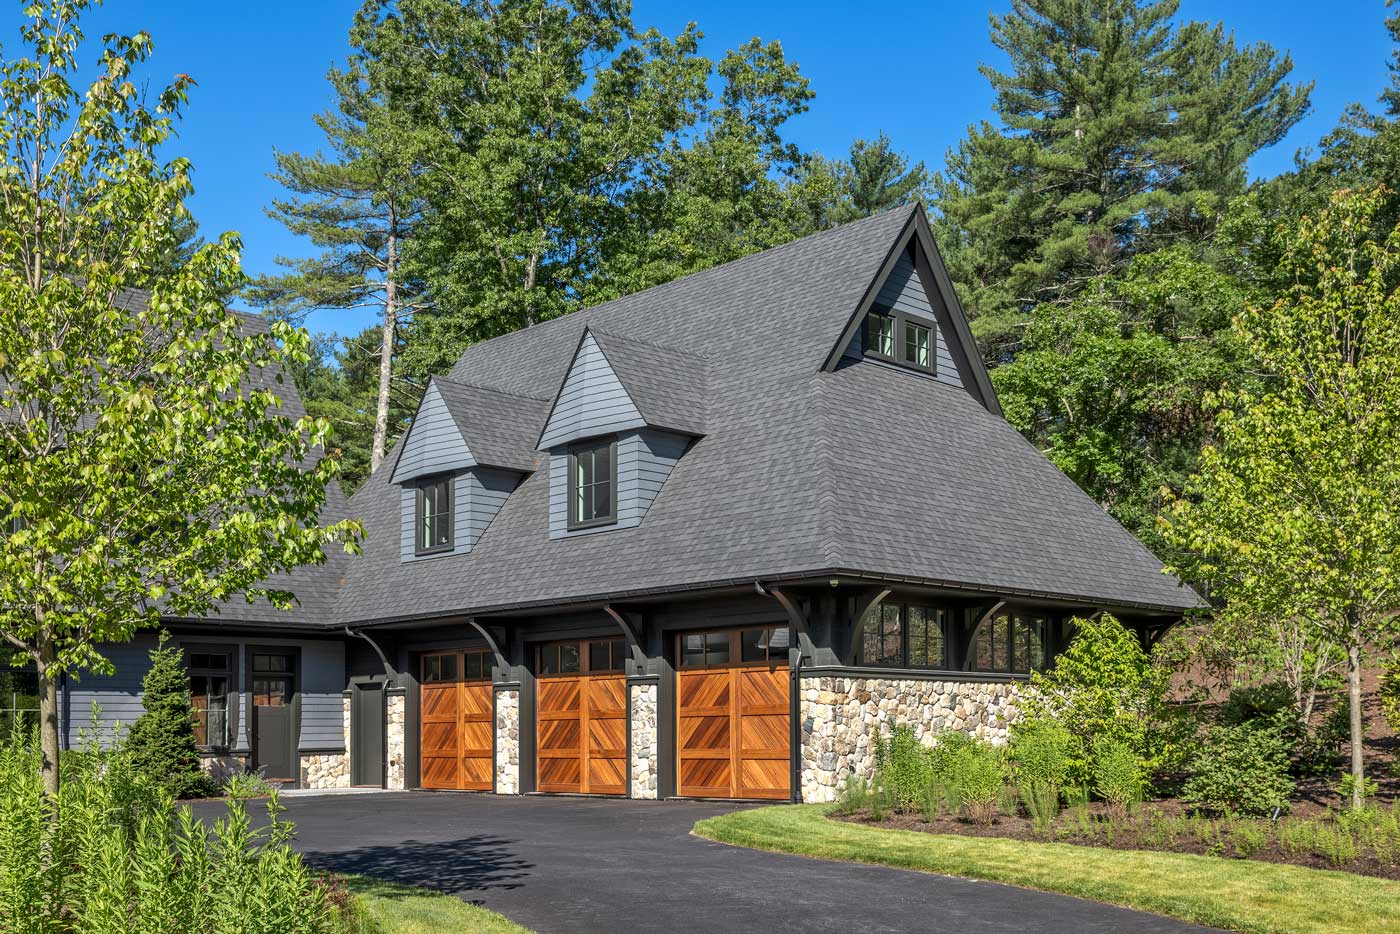 Shingle style home in rural wooded setting - Construction built 3 car garage / basketball court by Lynch Construction & Remodeling